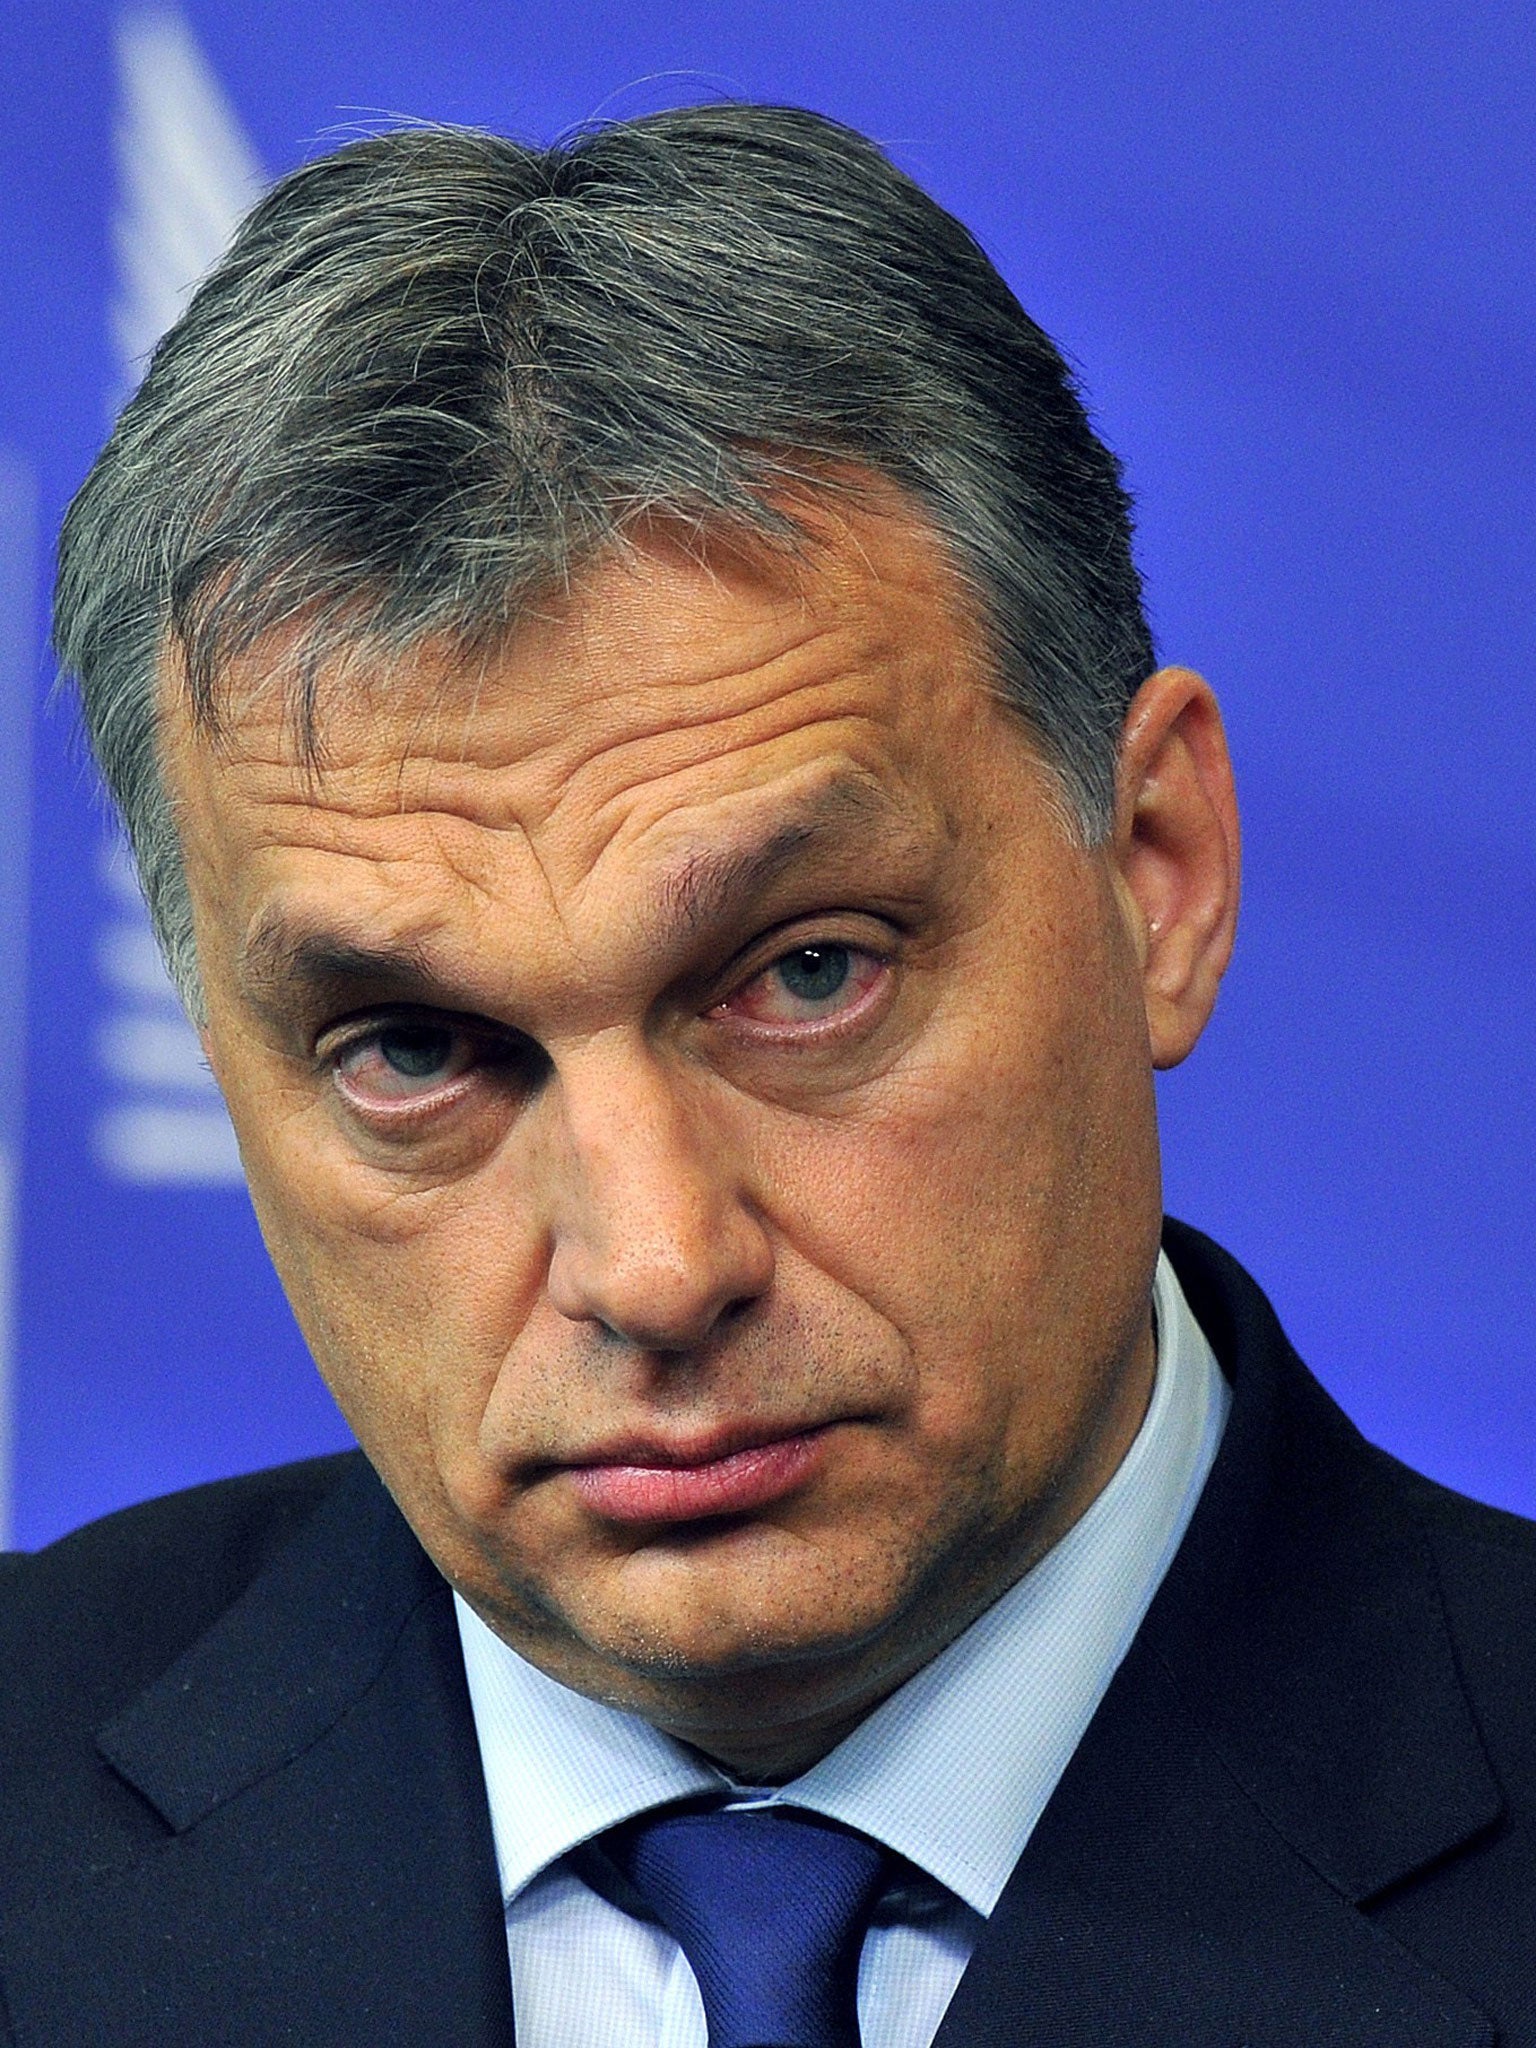 Conservative premier Viktor Orban (pictured) has come under fire after awarding Hungary's annual Tancsics prize to Ferenc Szaniszlo, a notorious right-wing TV presenter